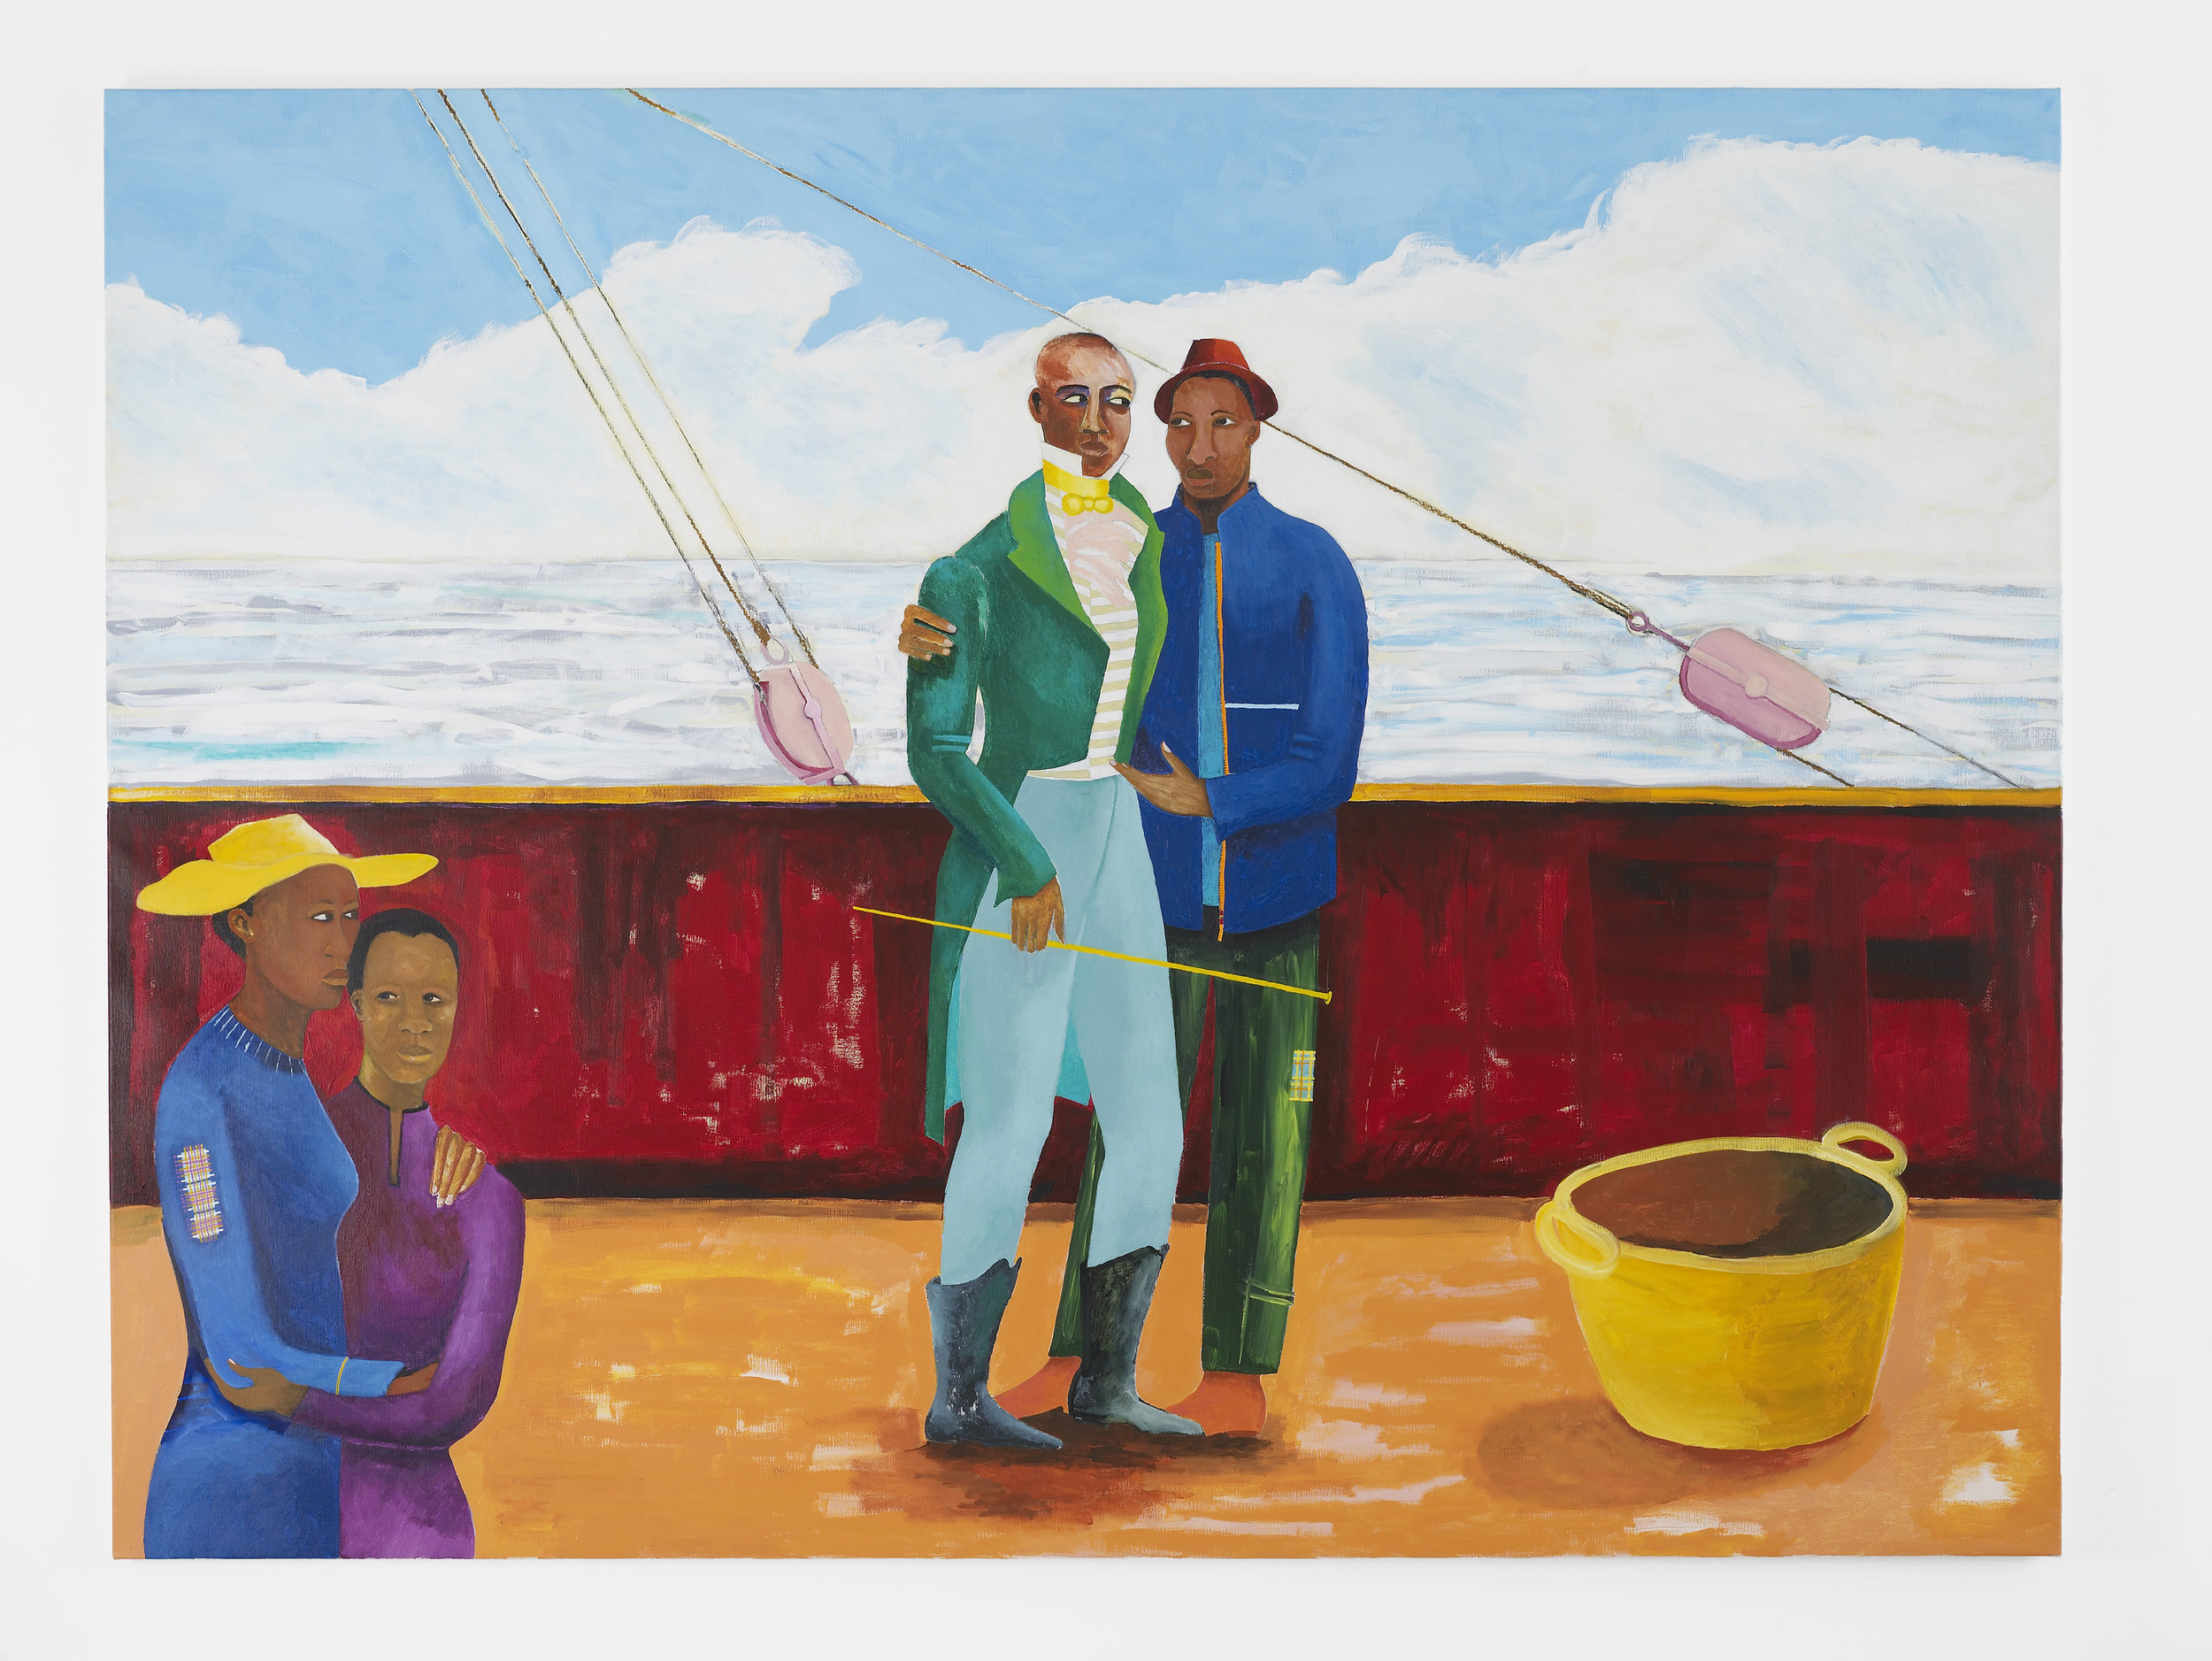  Lubaina Himid, Le Rodeur: The Captain and the Mate, 2017–18. Acrylic on canvas, 72 x 96 1/8 in (183 x 244 cm). Courtesy the artist and Hollybush Gardens. Photo: Andy Keate 